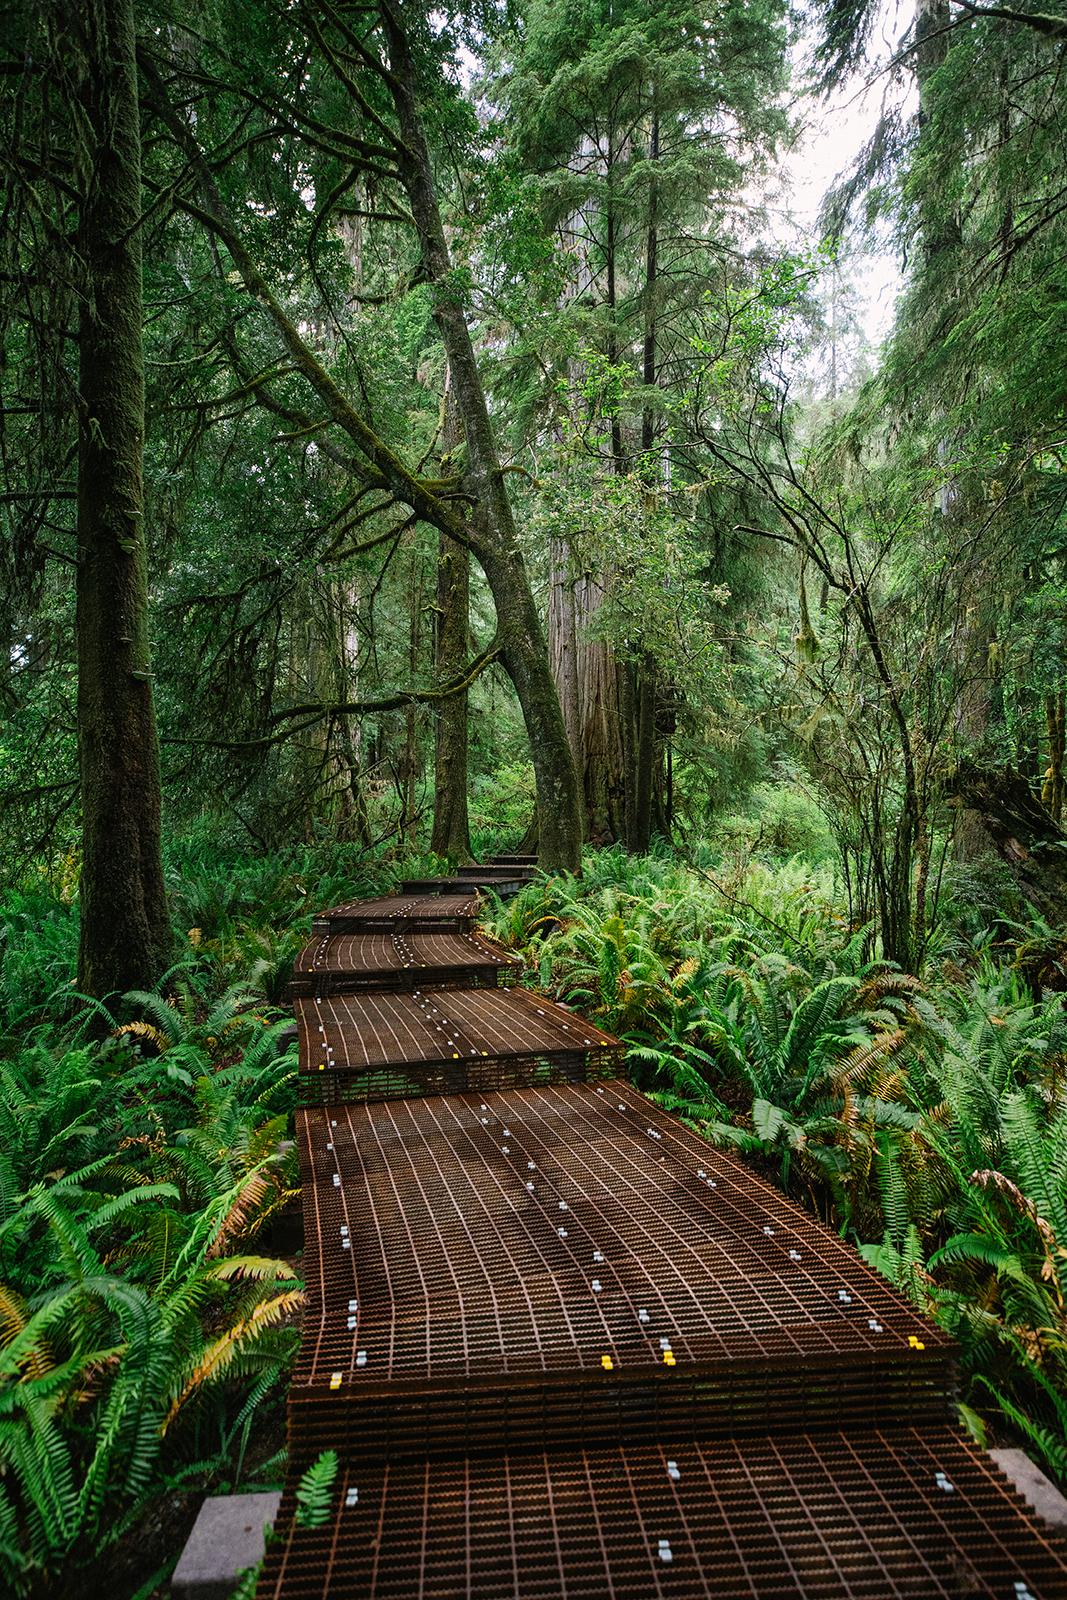 Elevated walkways on Mill Creek Trail at the Grove of Titans in Jedediah Smith Redwoods State Park in Crescent City, California help protect the trees' roots and other plant life from pedestrians. (Myung J. Chun/Los Angeles Times/TNS)